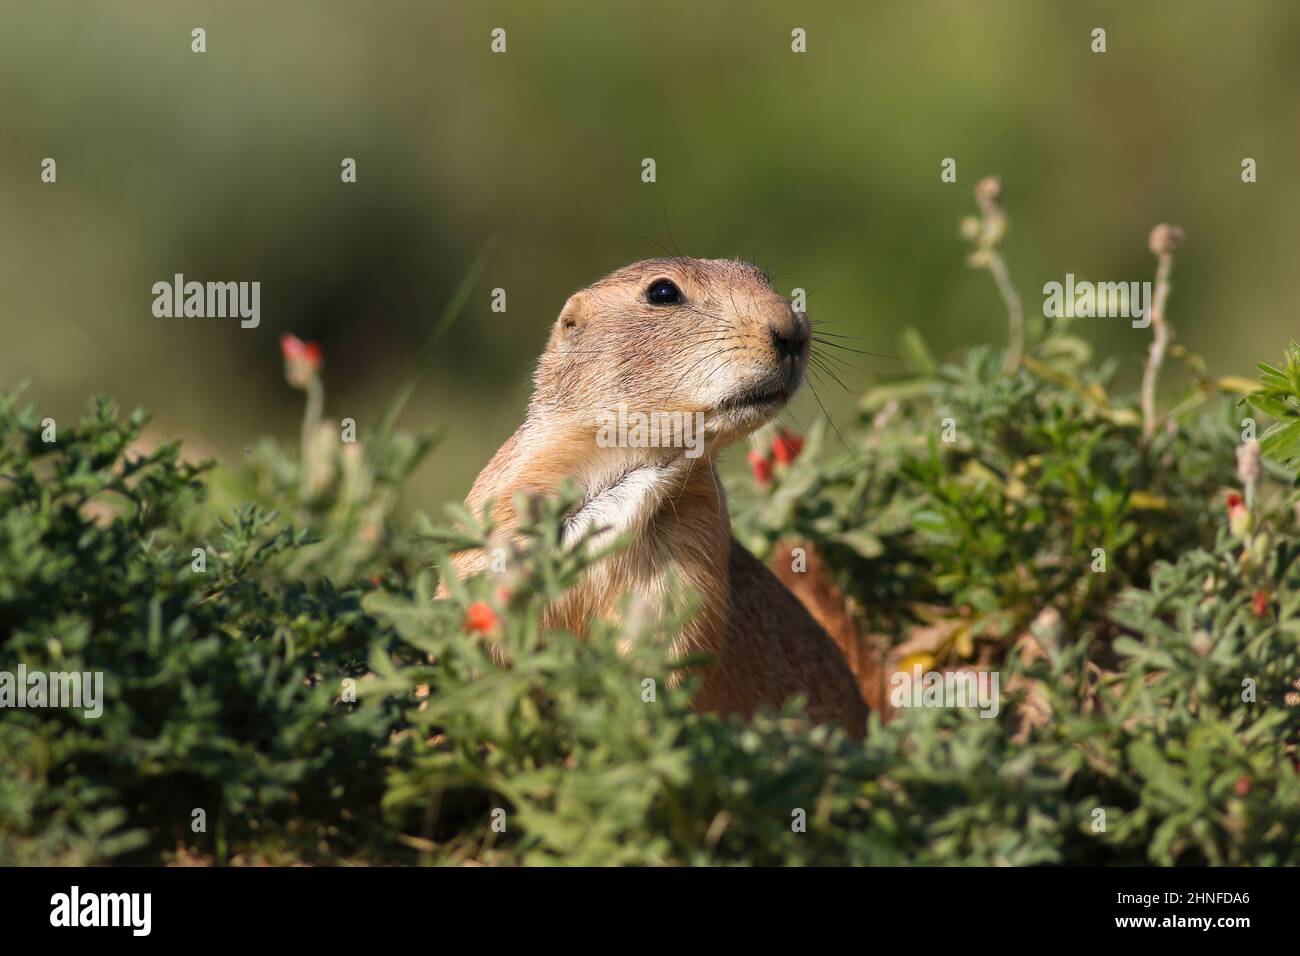 Close up portrait of a Black-tailed Prairie Dog surrounded by green vegetation with a few orange wildflowers. Stock Photo